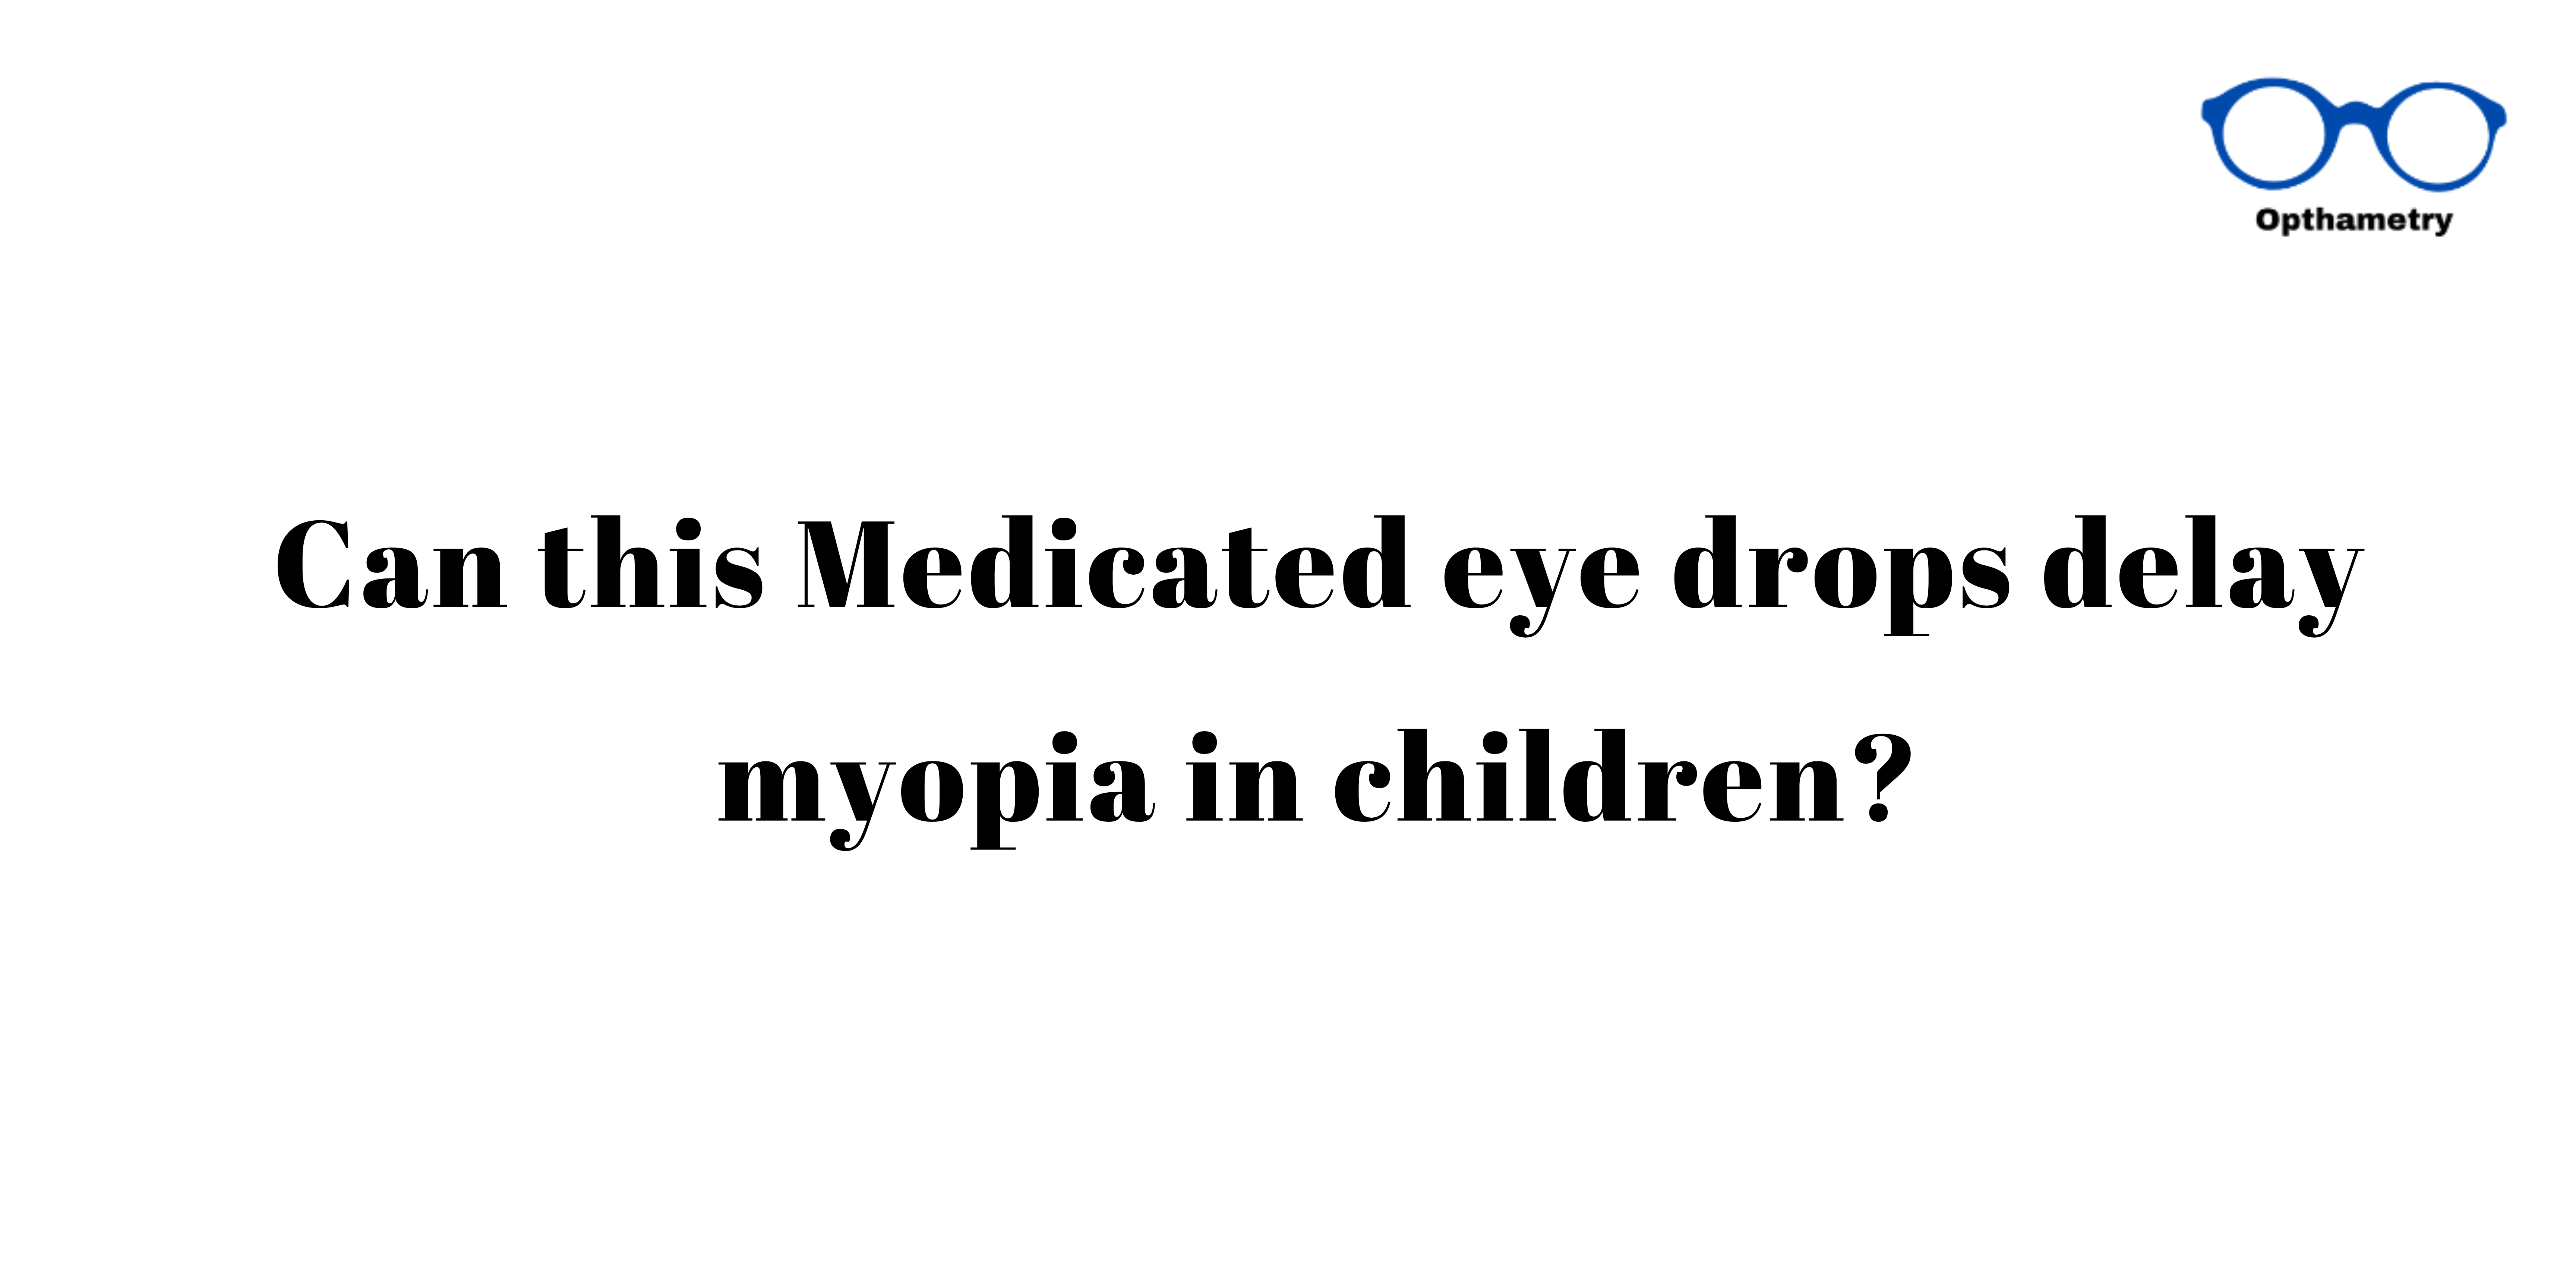 Can this Medicated eye drops delay myopia in children?